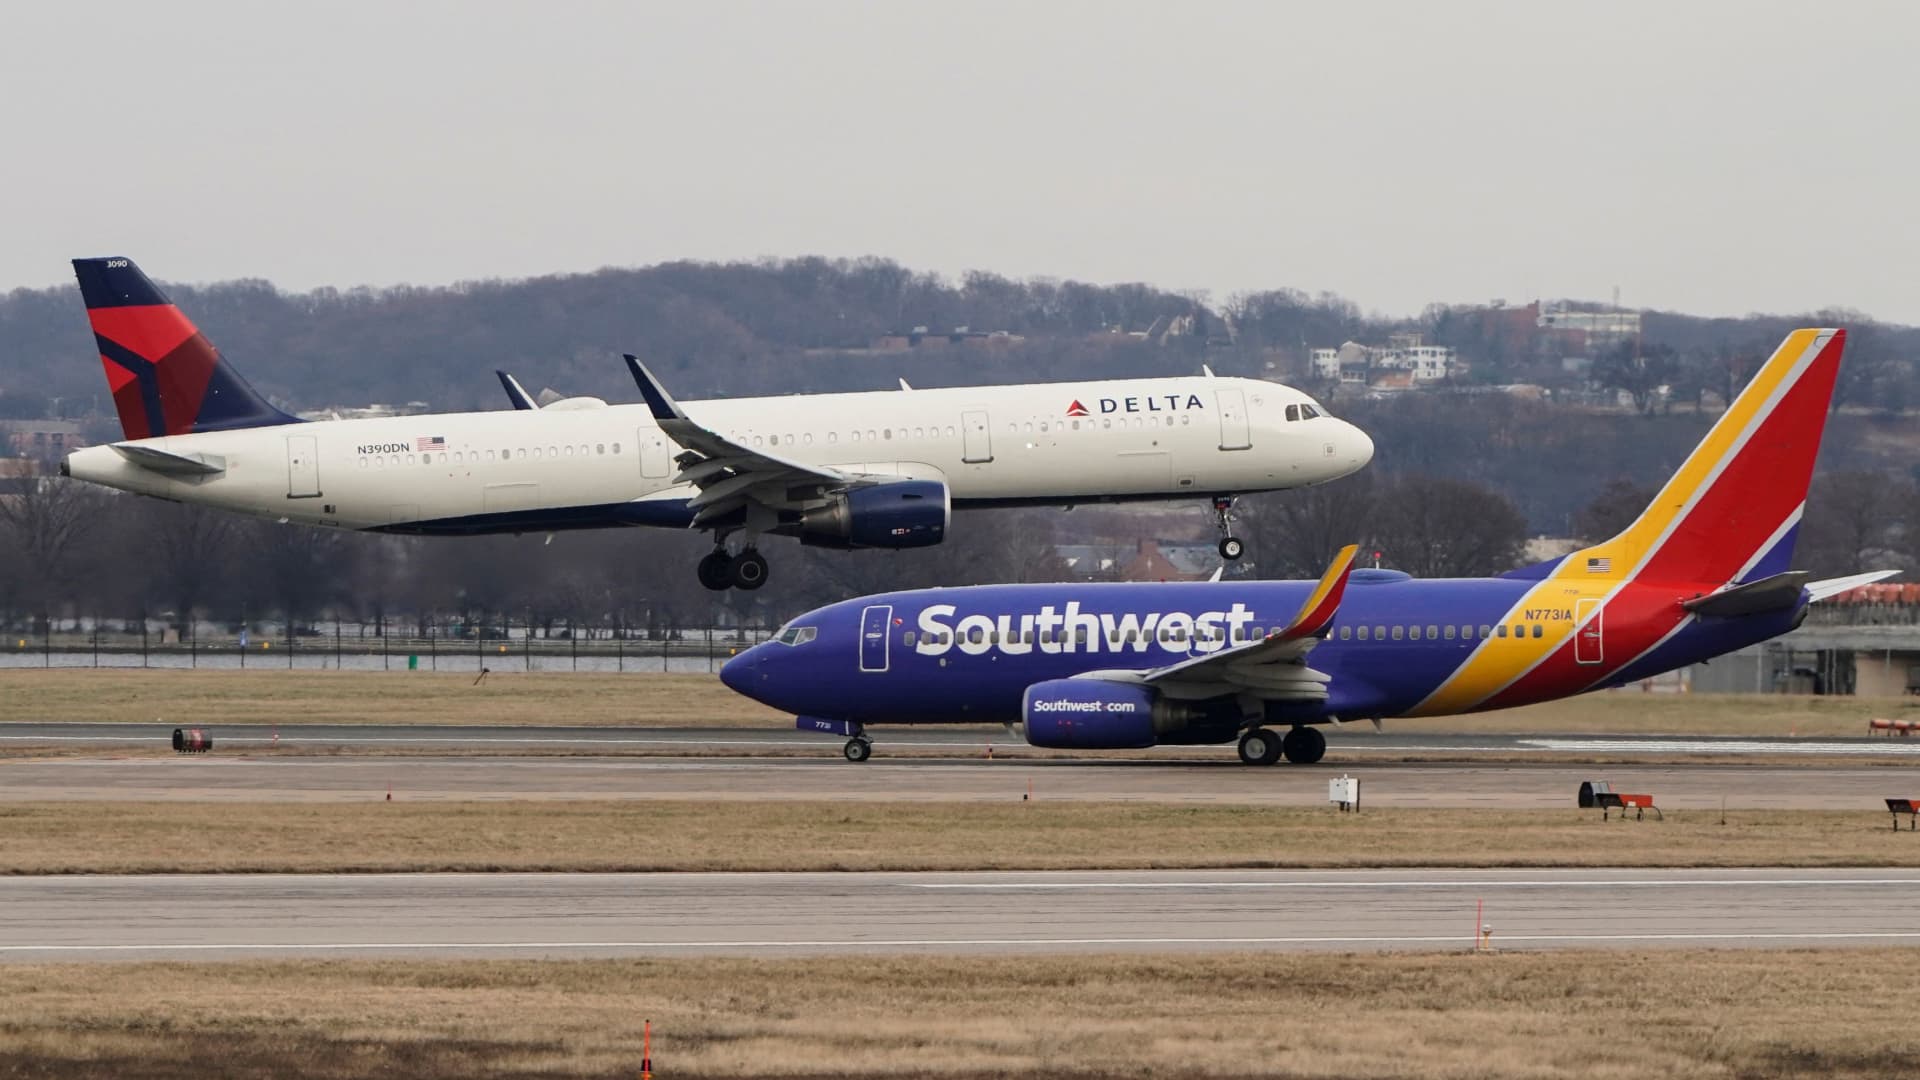 A Southwest Airlines aircraft taxis as a Delta Air Lines aircraft lands at Reagan National Airport in Arlington, Virginia, U.S., January 24, 2022.